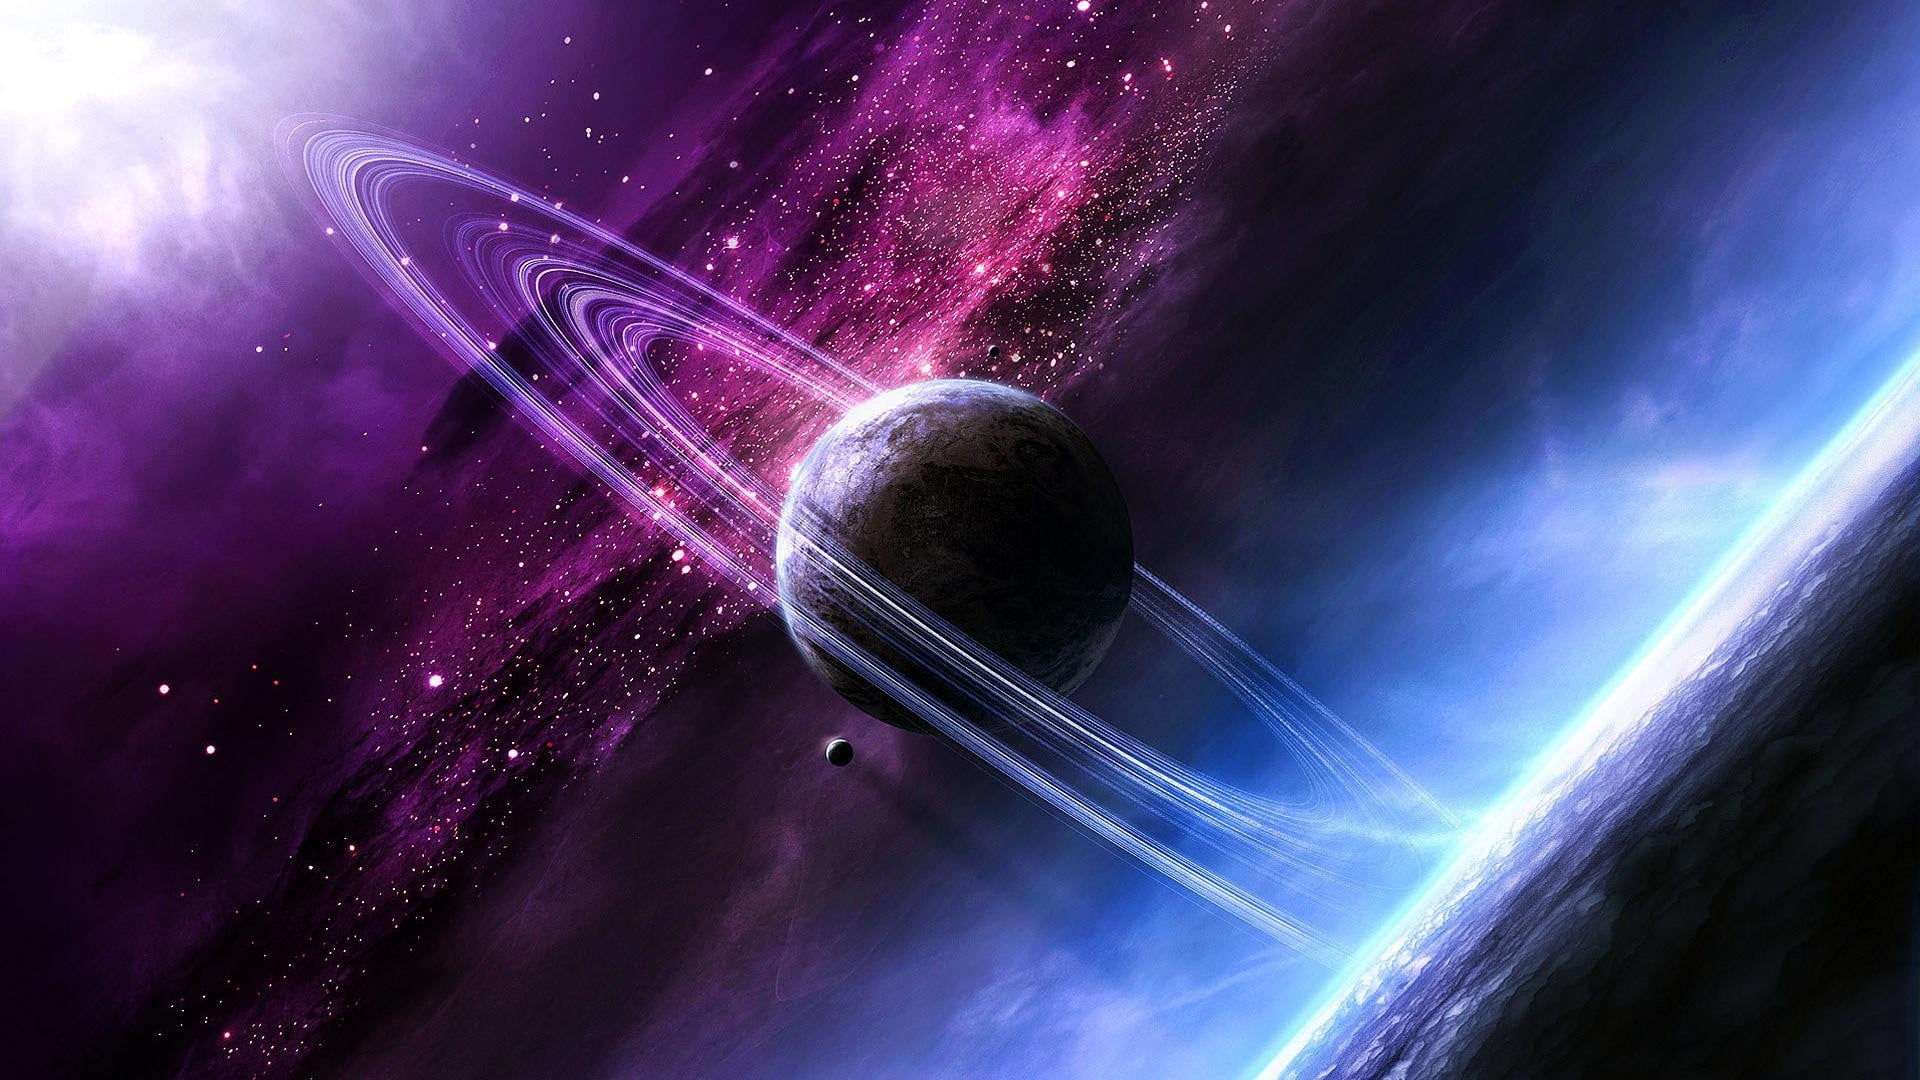 illustration of planet in galaxy, space, planetary rings, purple